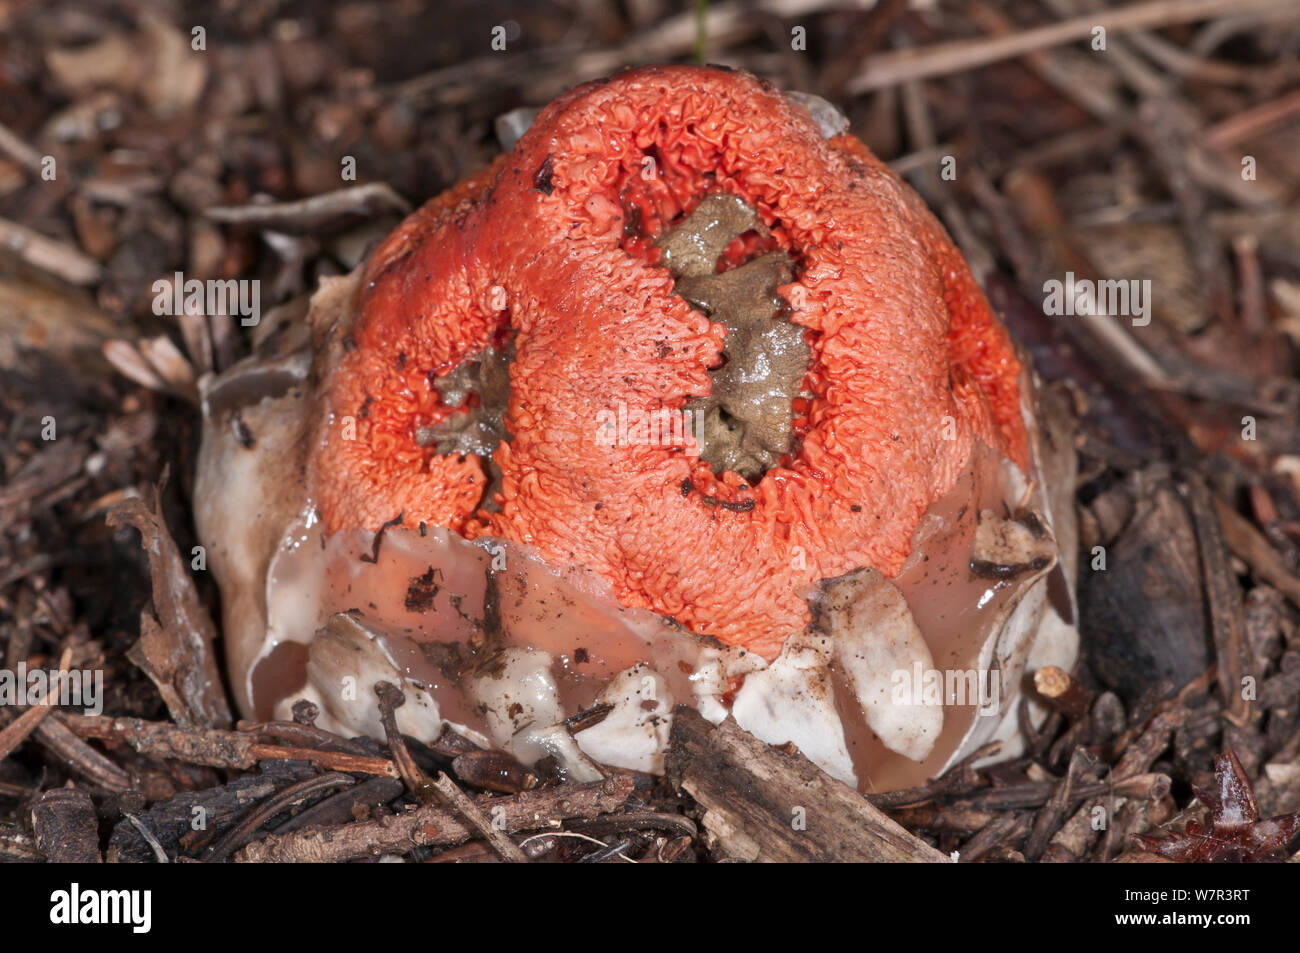 Basket Stinkhorn (Clathrus ruber) a fungus resembling and smelling of rotten flesh, near Castel Giorgio, Orvieto, Umbria, Italy, October Stock Photo